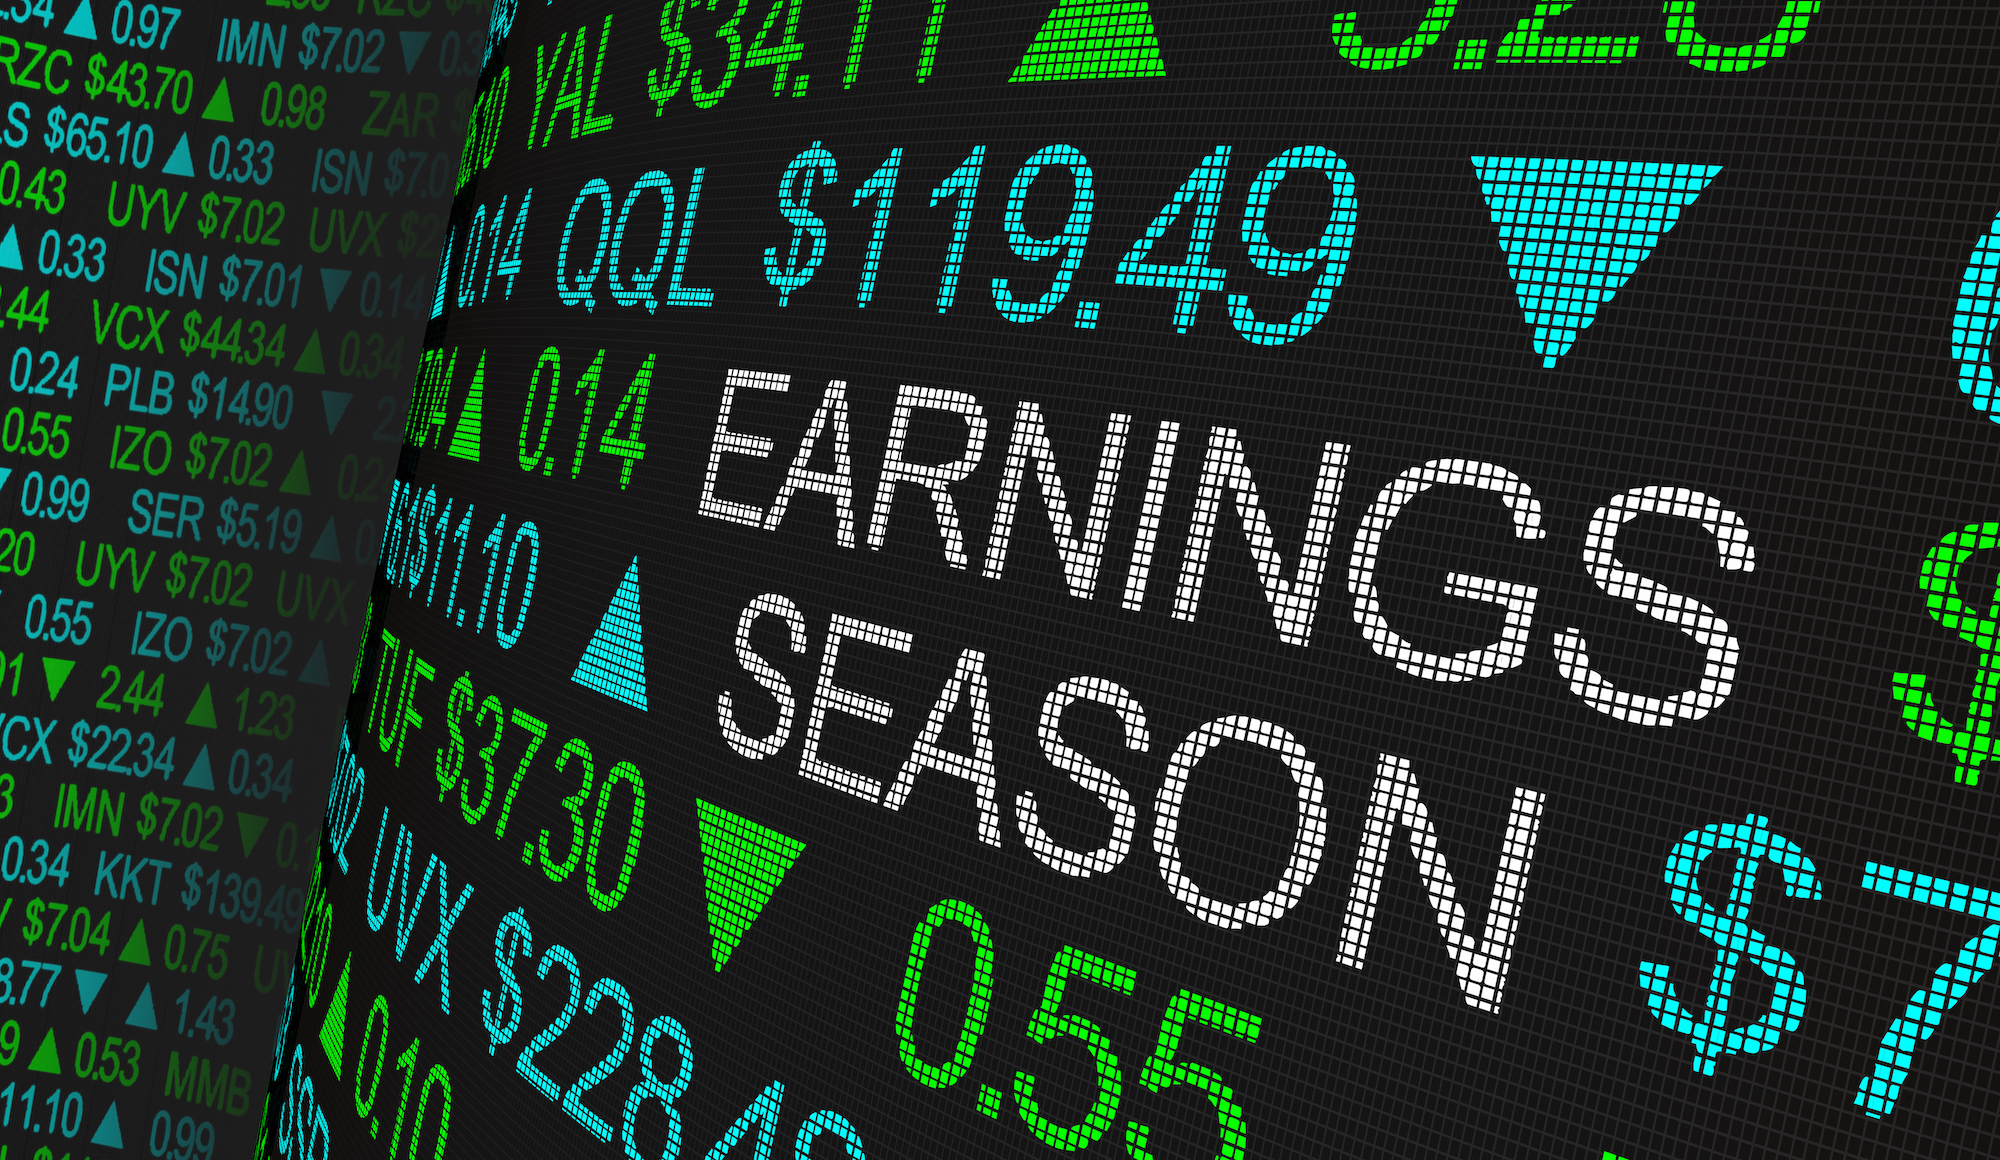 ai news from earnings calls